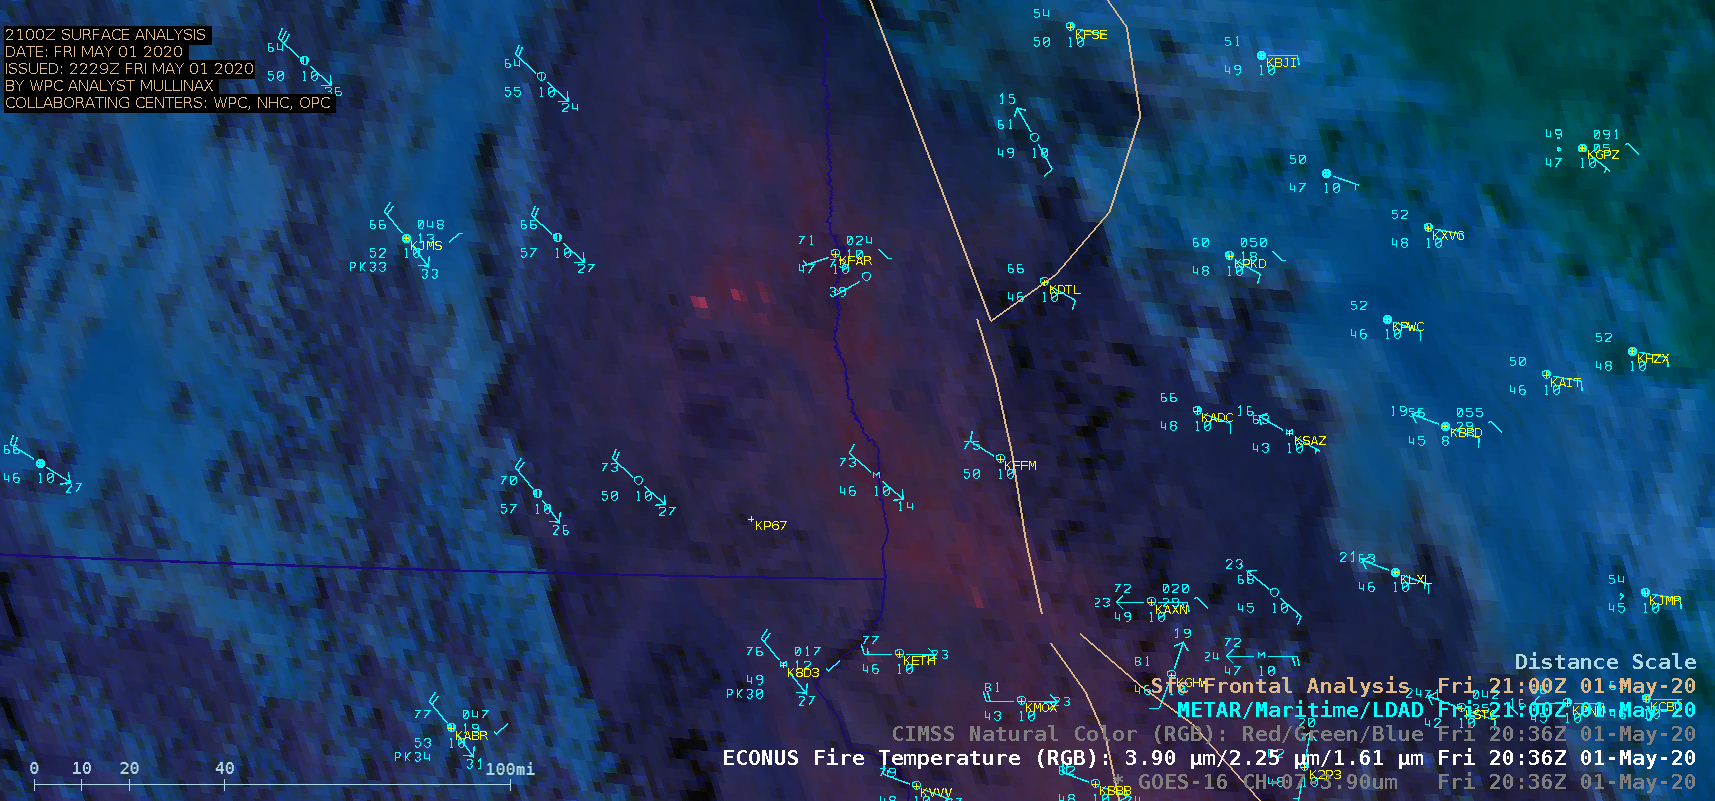 GOES-16 CIMSS Natural Color RGB, Fire Temperature RGB and Shortwave Infrared (3.9 µm) images [click to play animation | MP4]